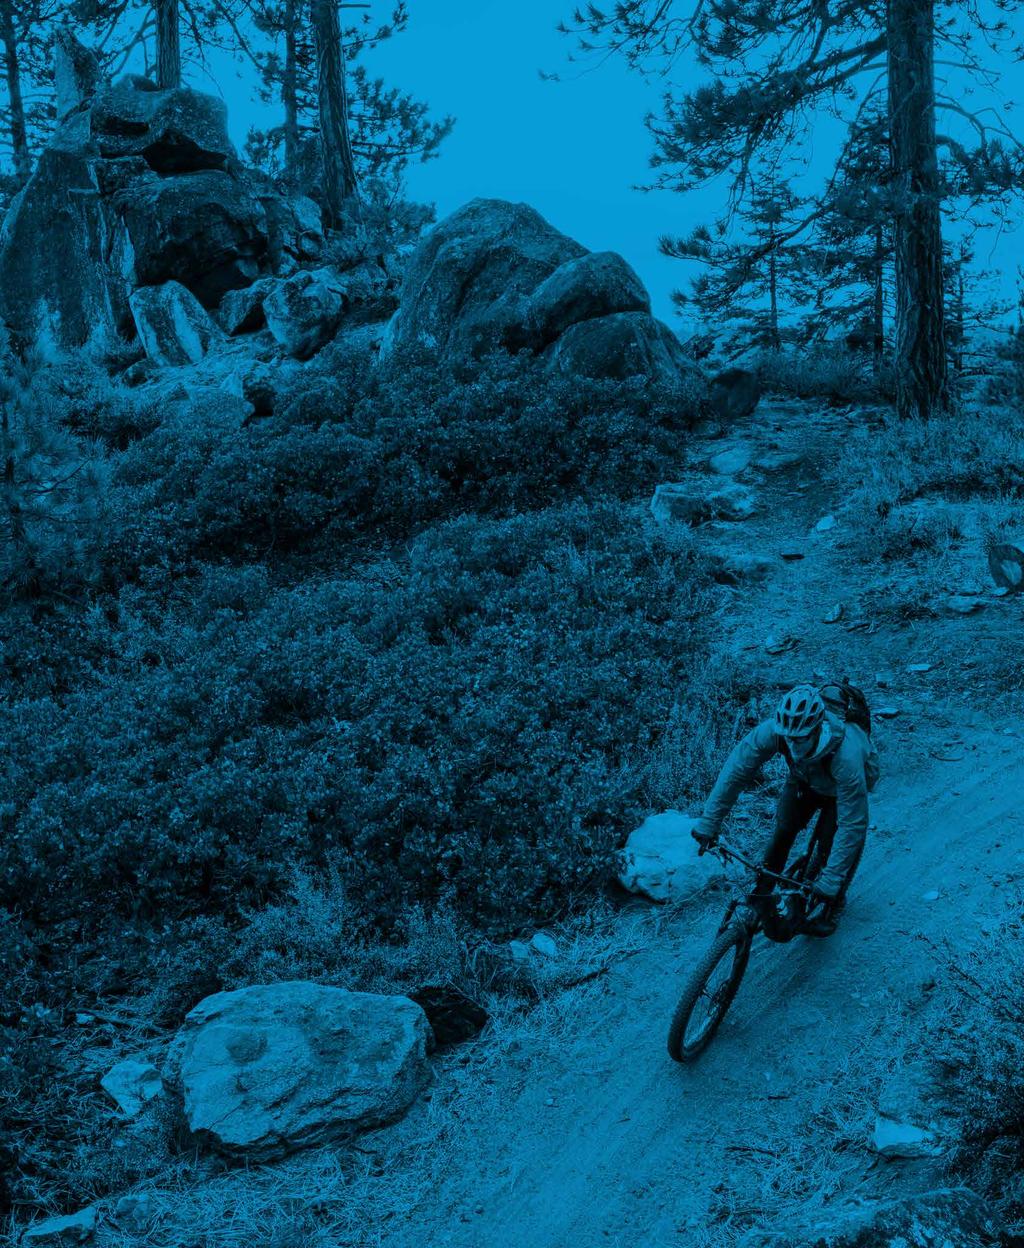 OVERVIEW Lake Tahoe is an iconic destination for mountain biking. With crystal blue waters surrounded by mountain peaks on all sides, the area is one of the most scenic places you ll ever ride.